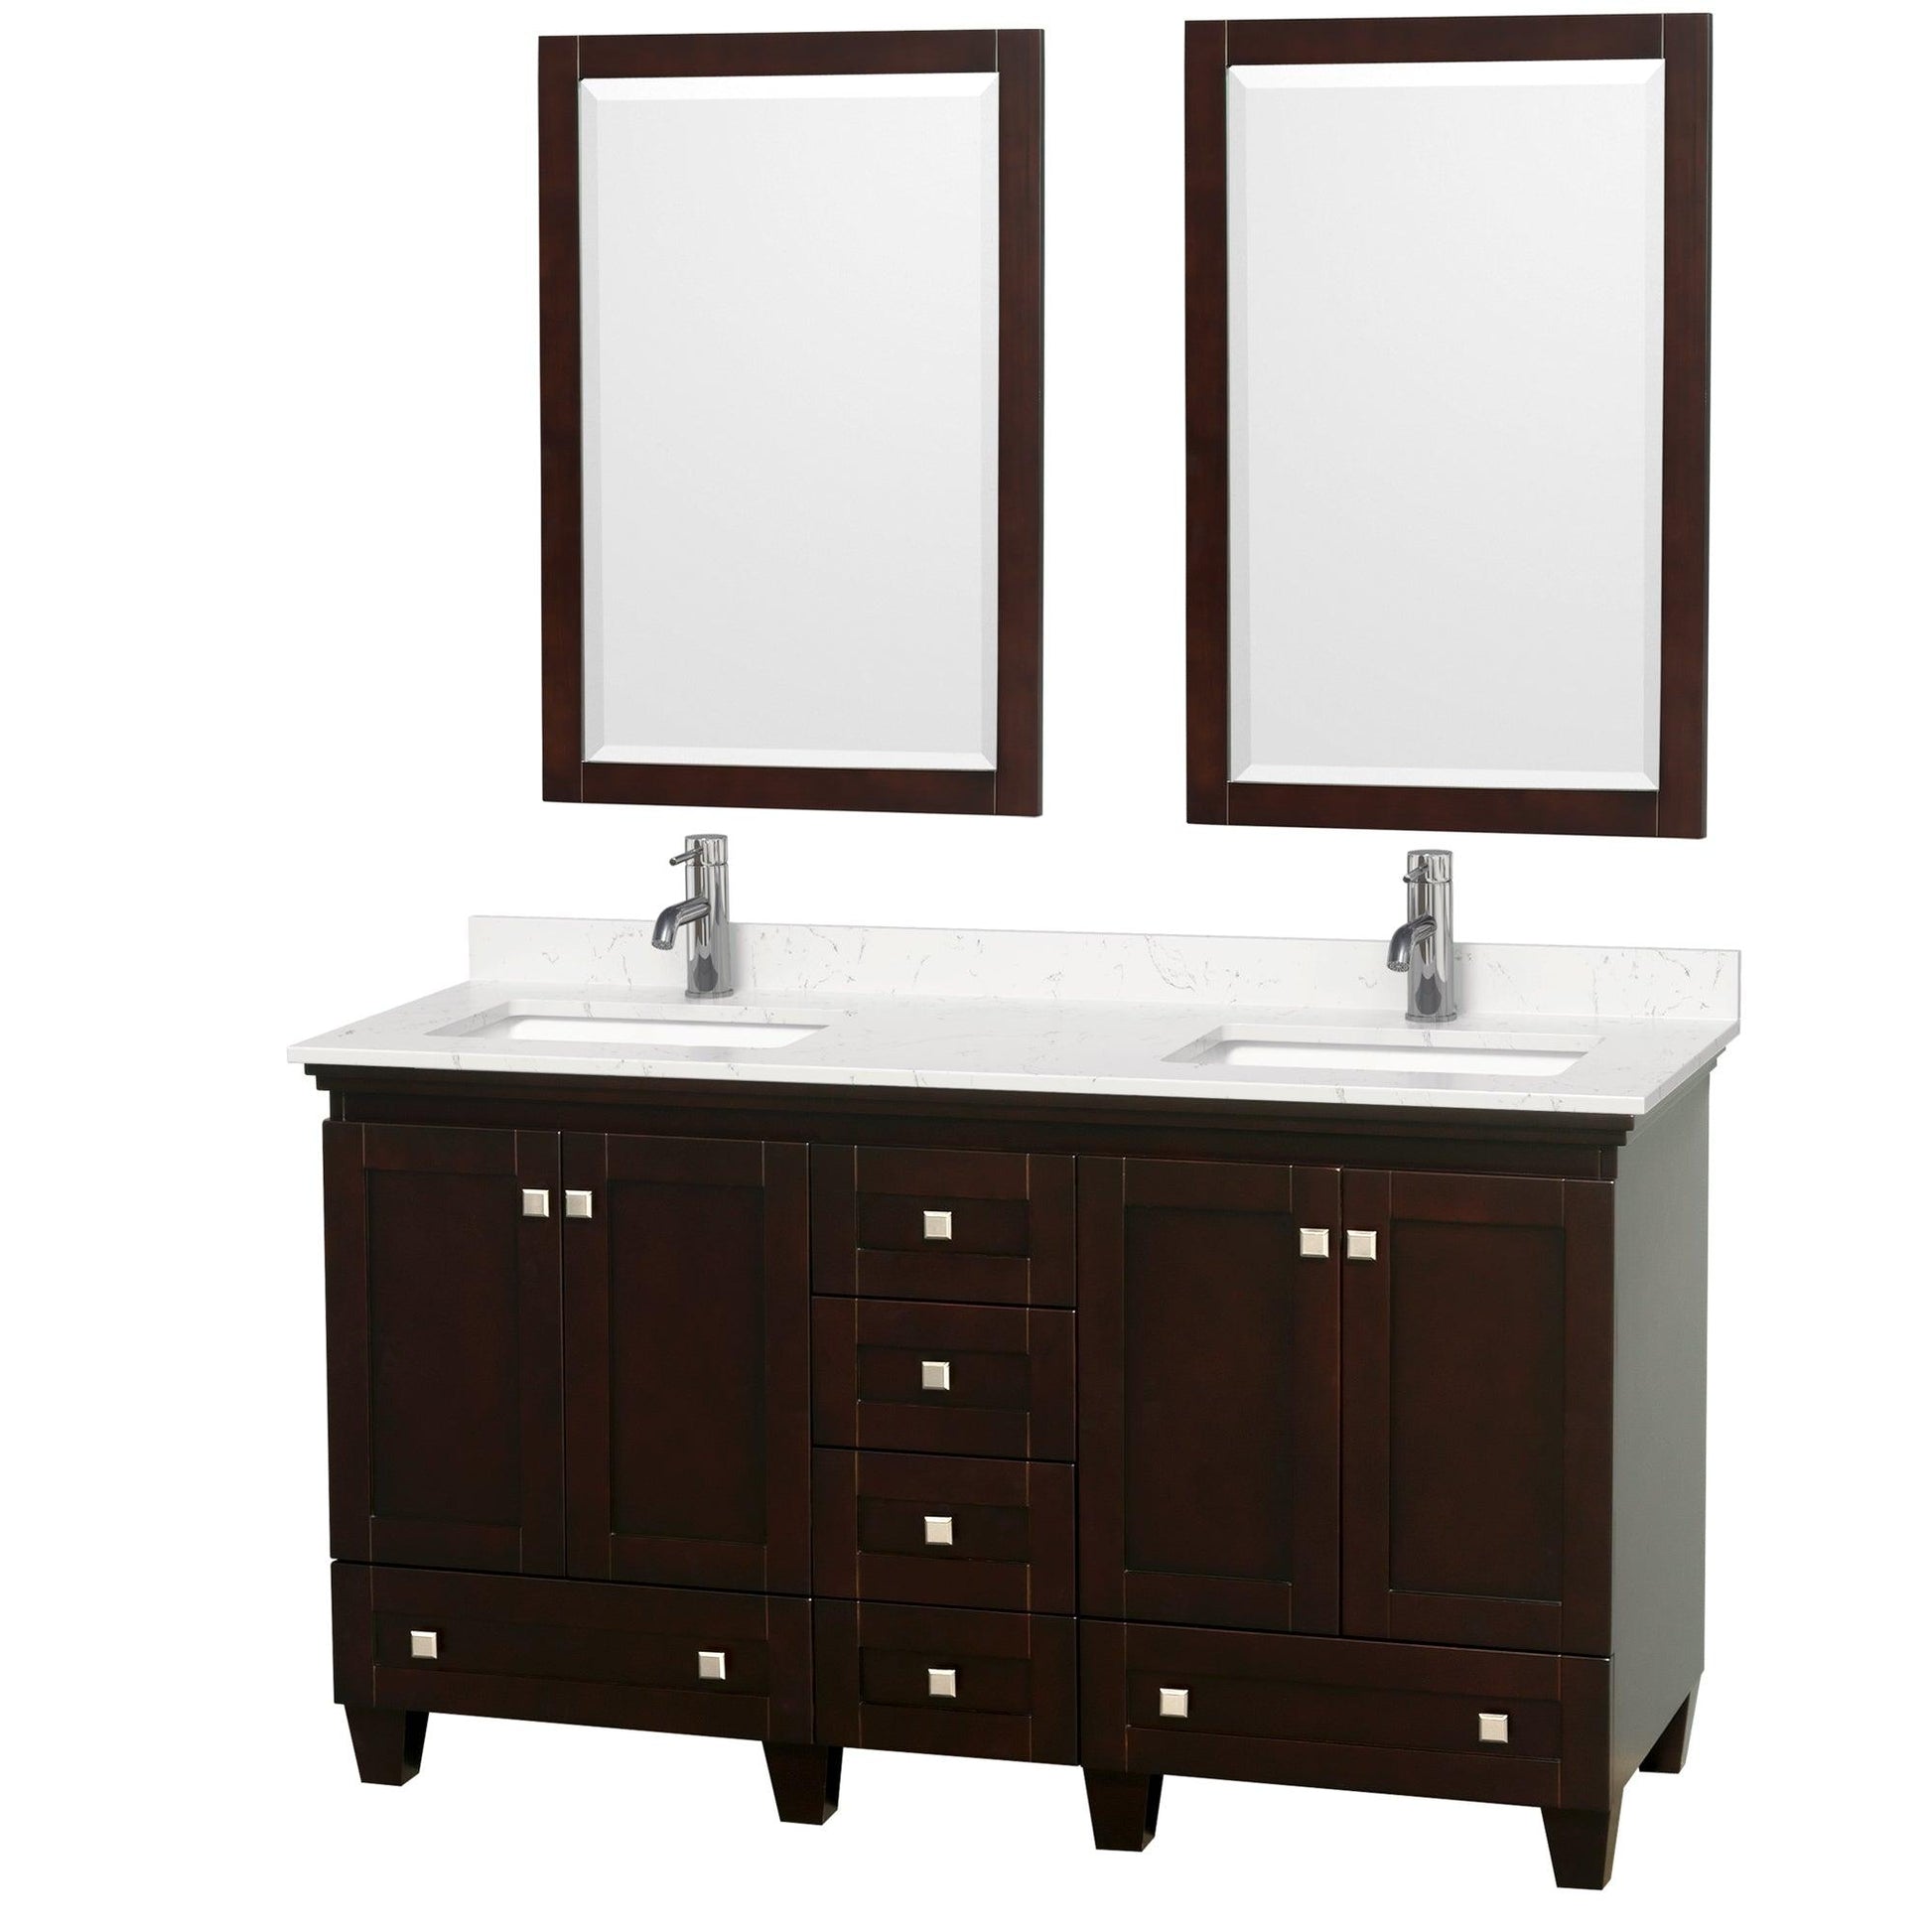 Wyndham Collection Acclaim Double Bathroom Vanity with Light-Vein Carrara Cultured Marble Countertop, Undermount Square Sinks, and Optional 24" Mirrors - Sea & Stone Bath